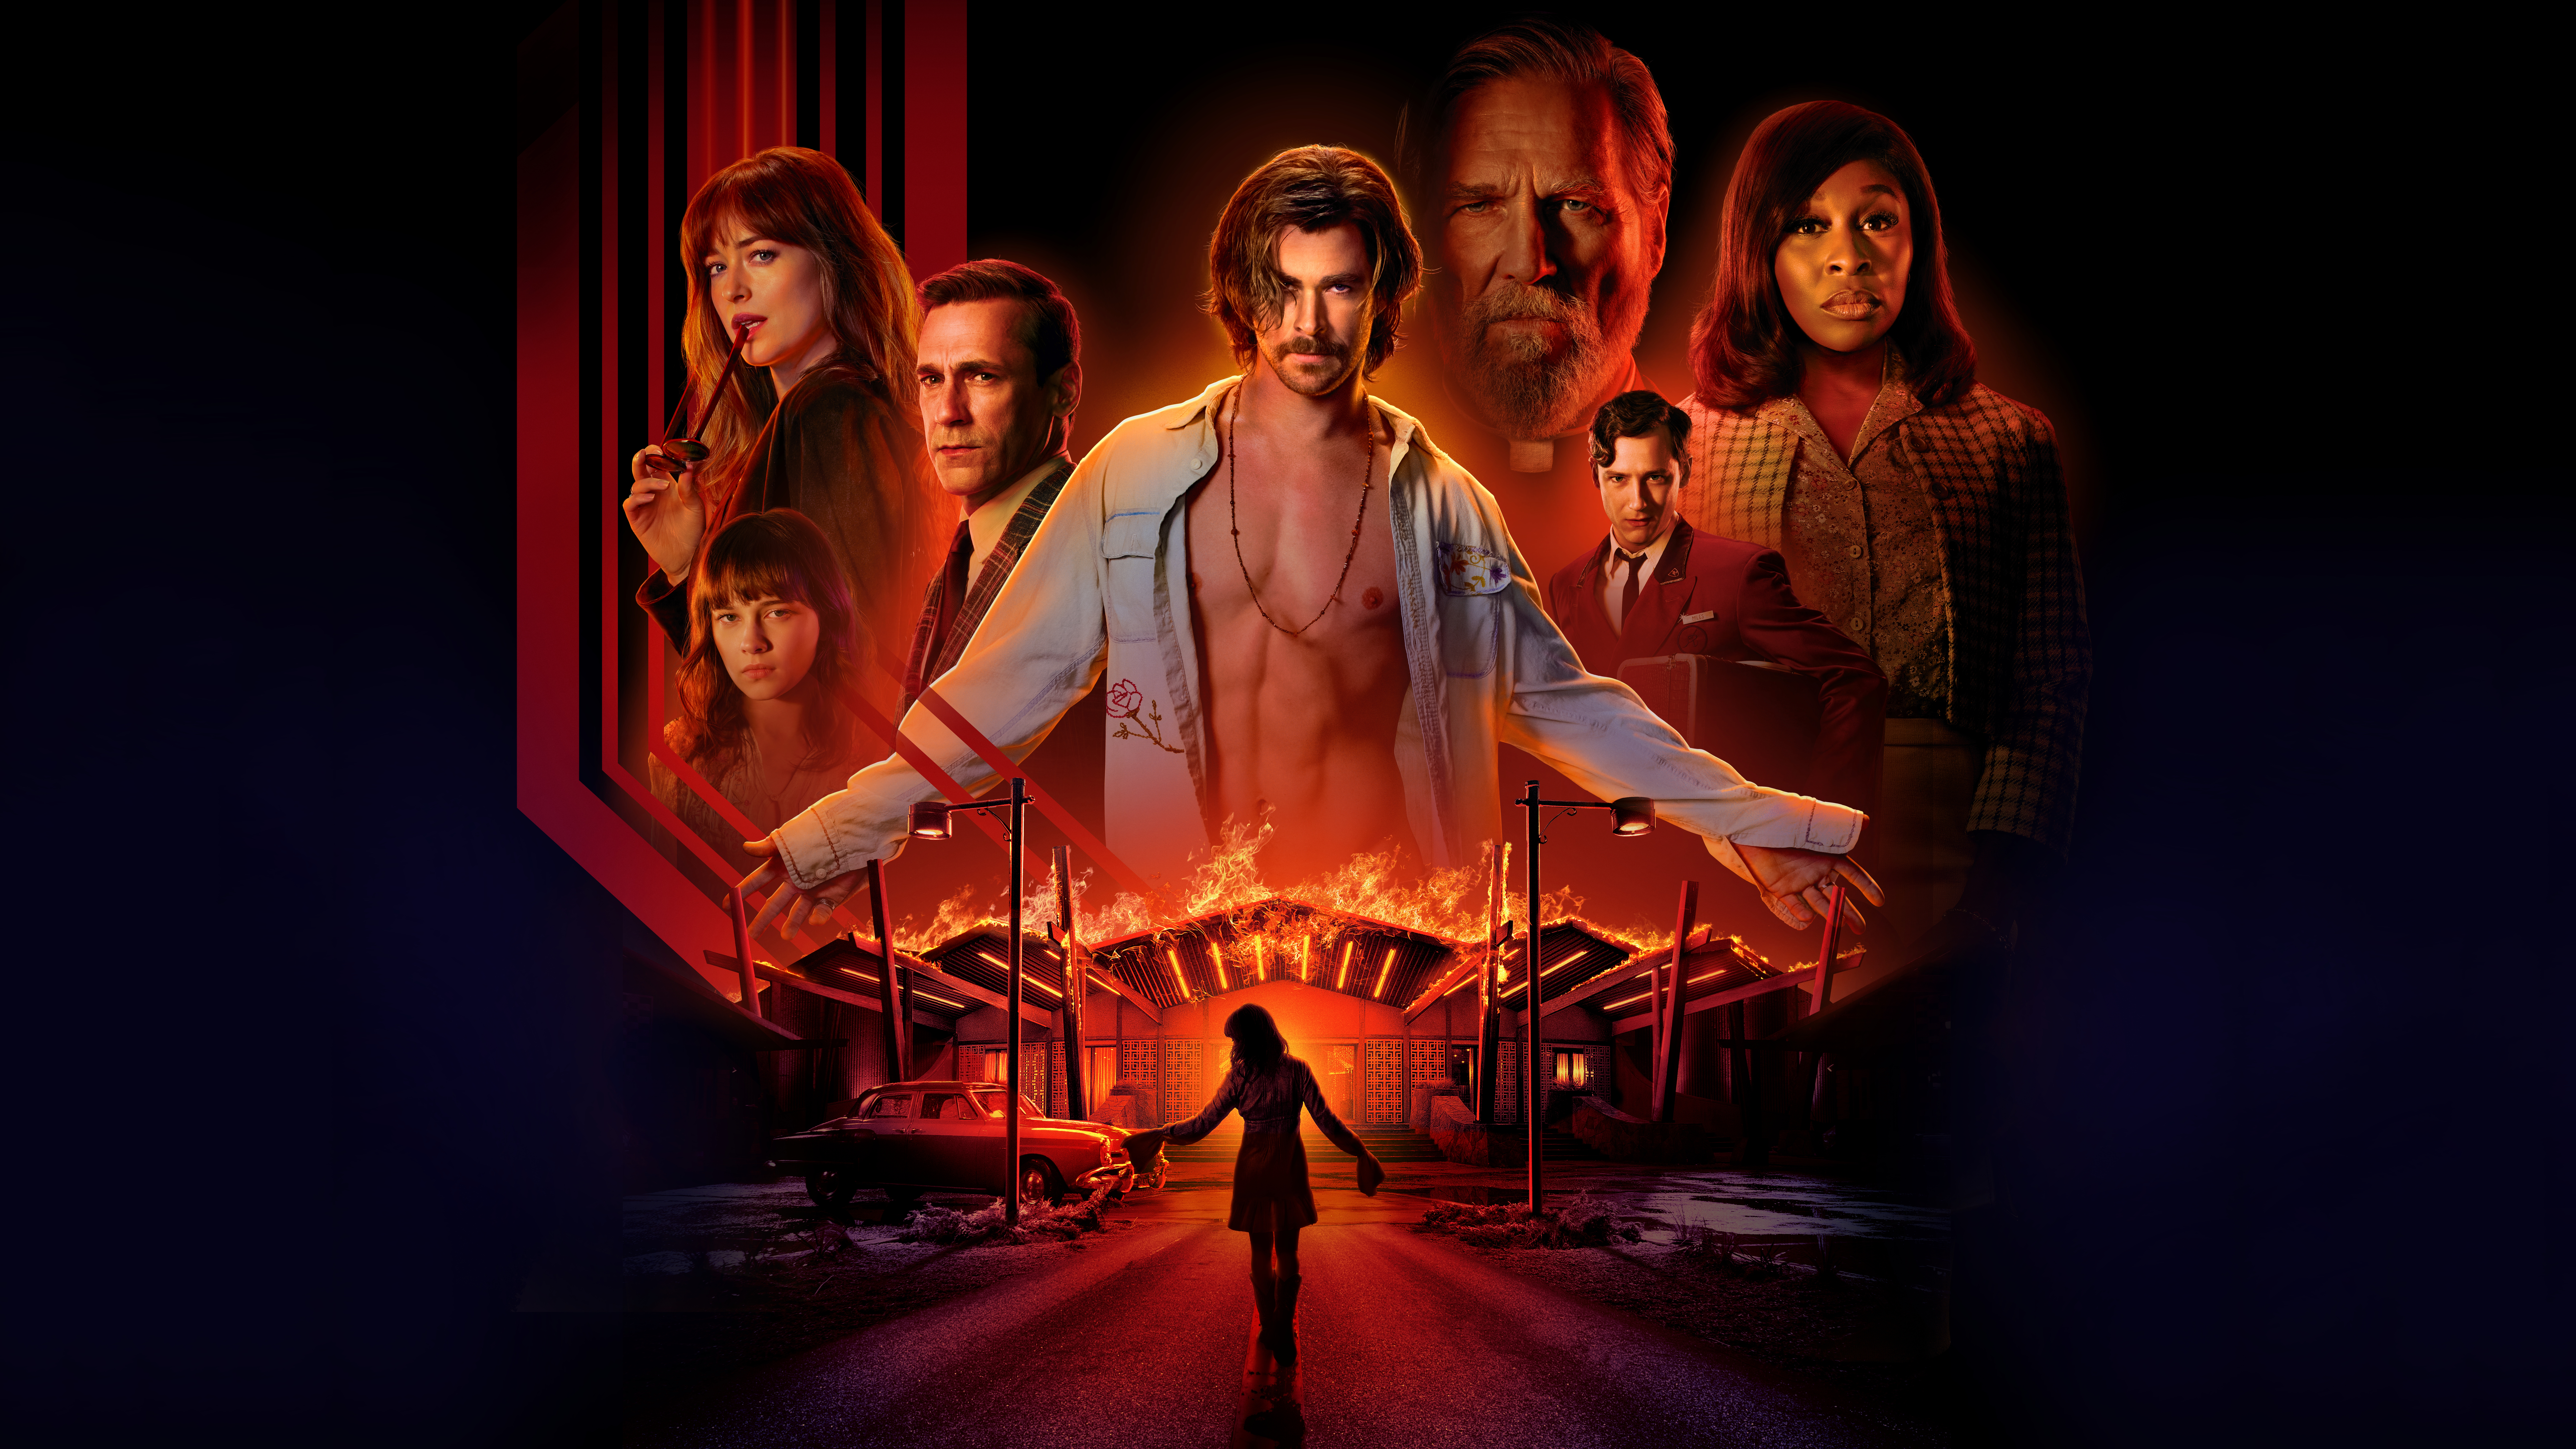 Movie Bad Times at the El Royale HD Wallpaper | Background Image